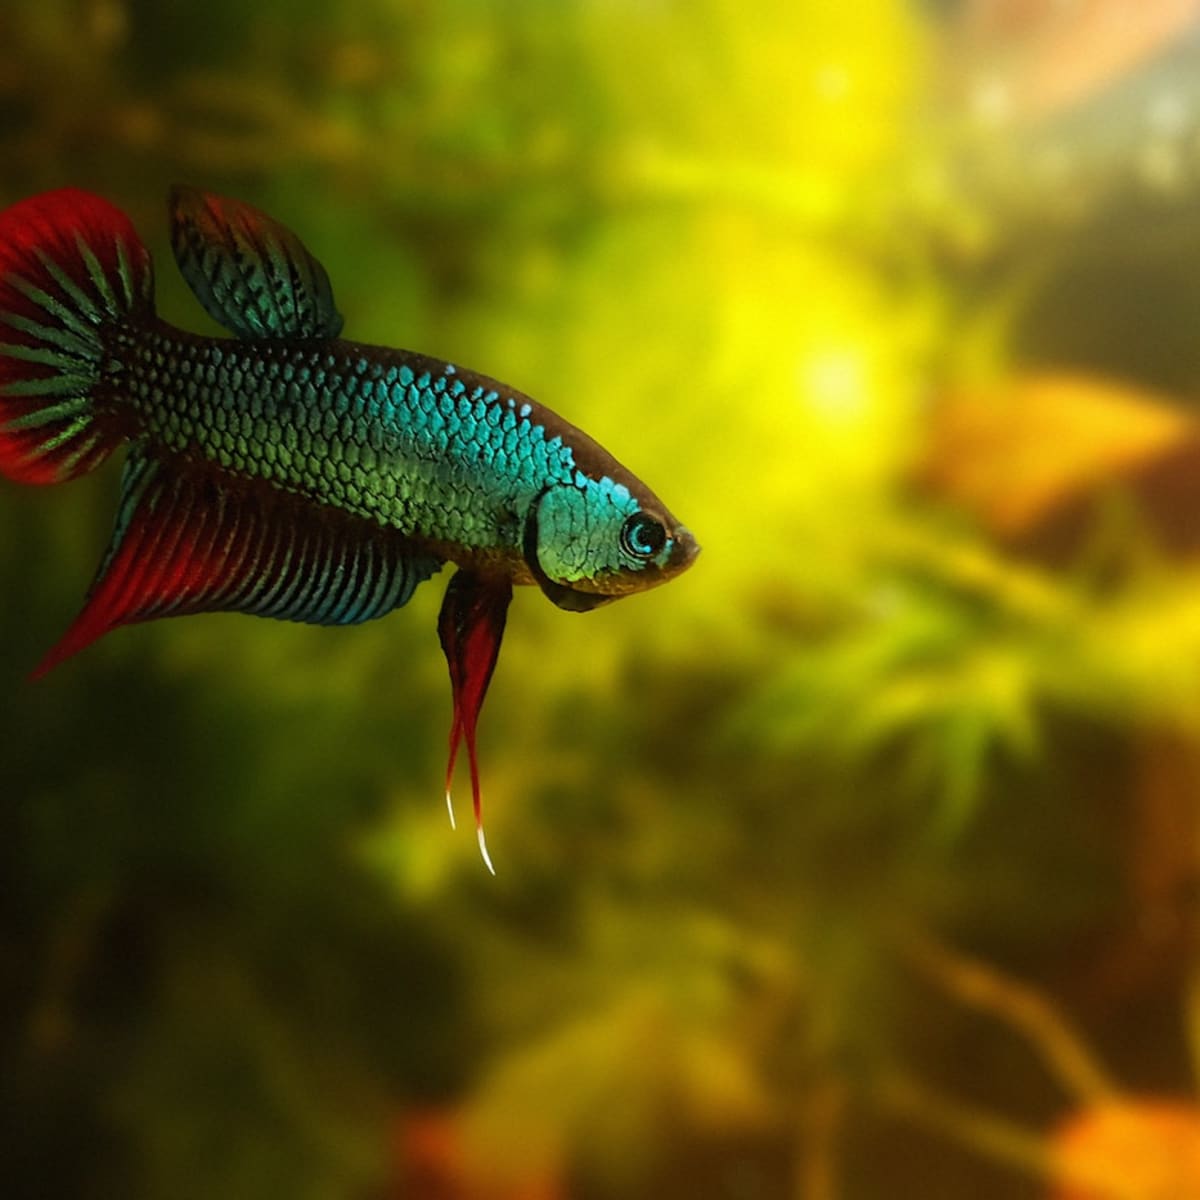 Why did one of my female betta fish suddenly kill another one? - Quora